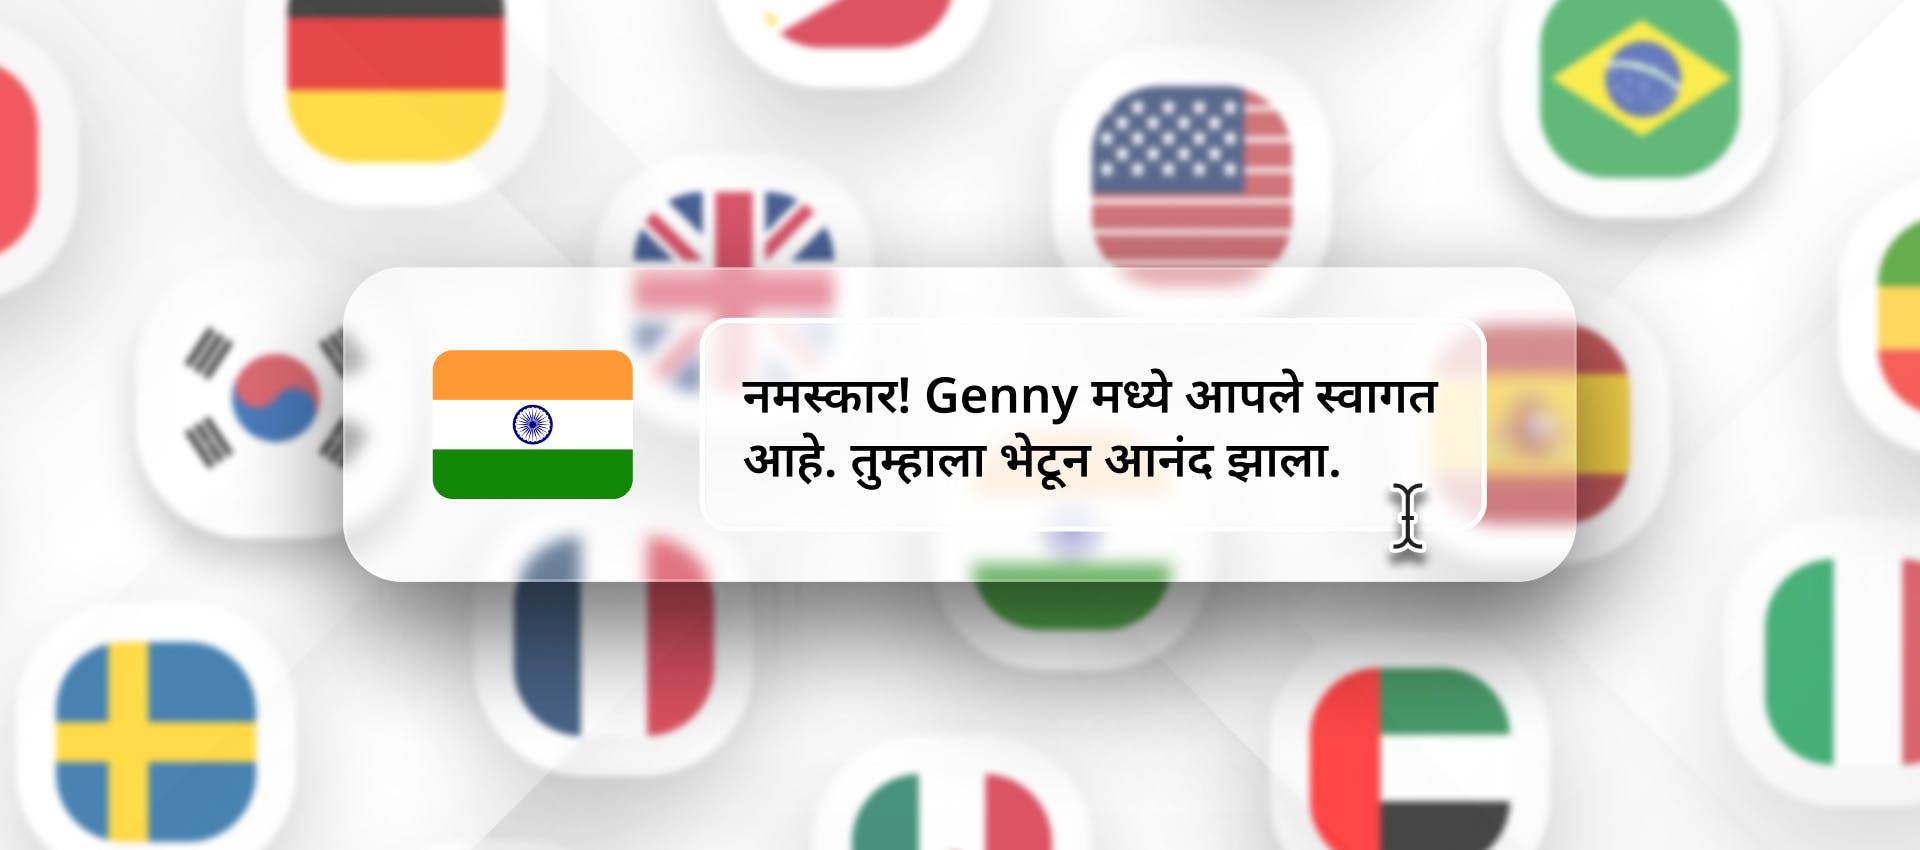 Marathi phrase for Marathi TTS generation with different flags in the background